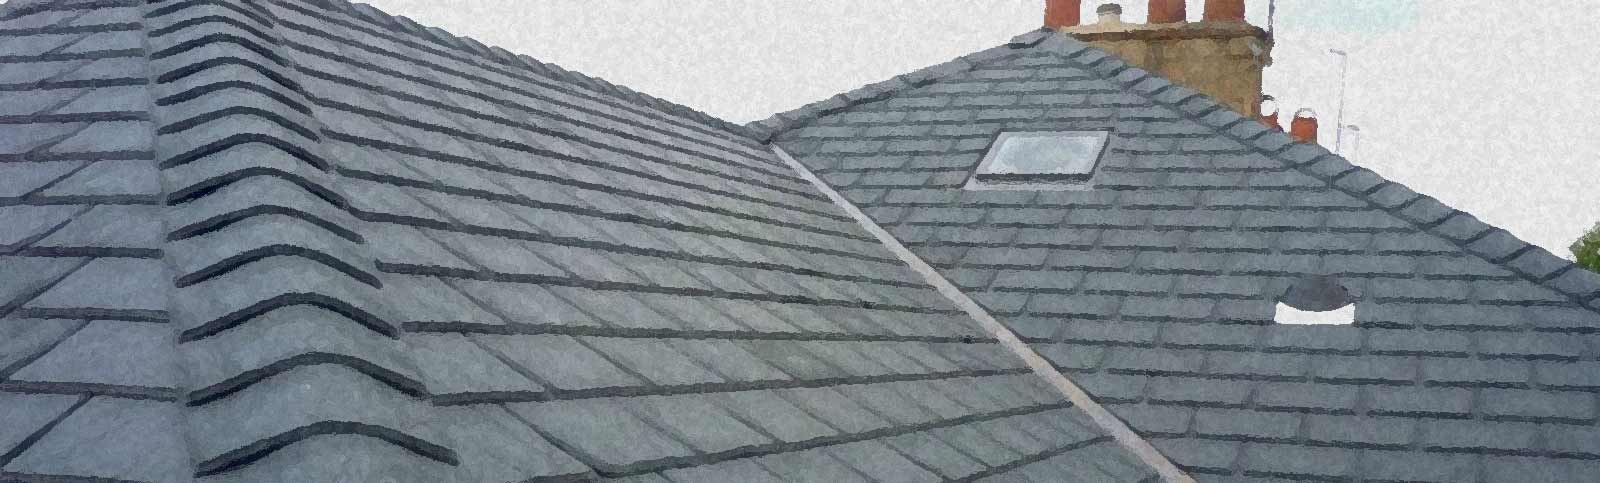 Tips To Finding A Good Roofing Contractor